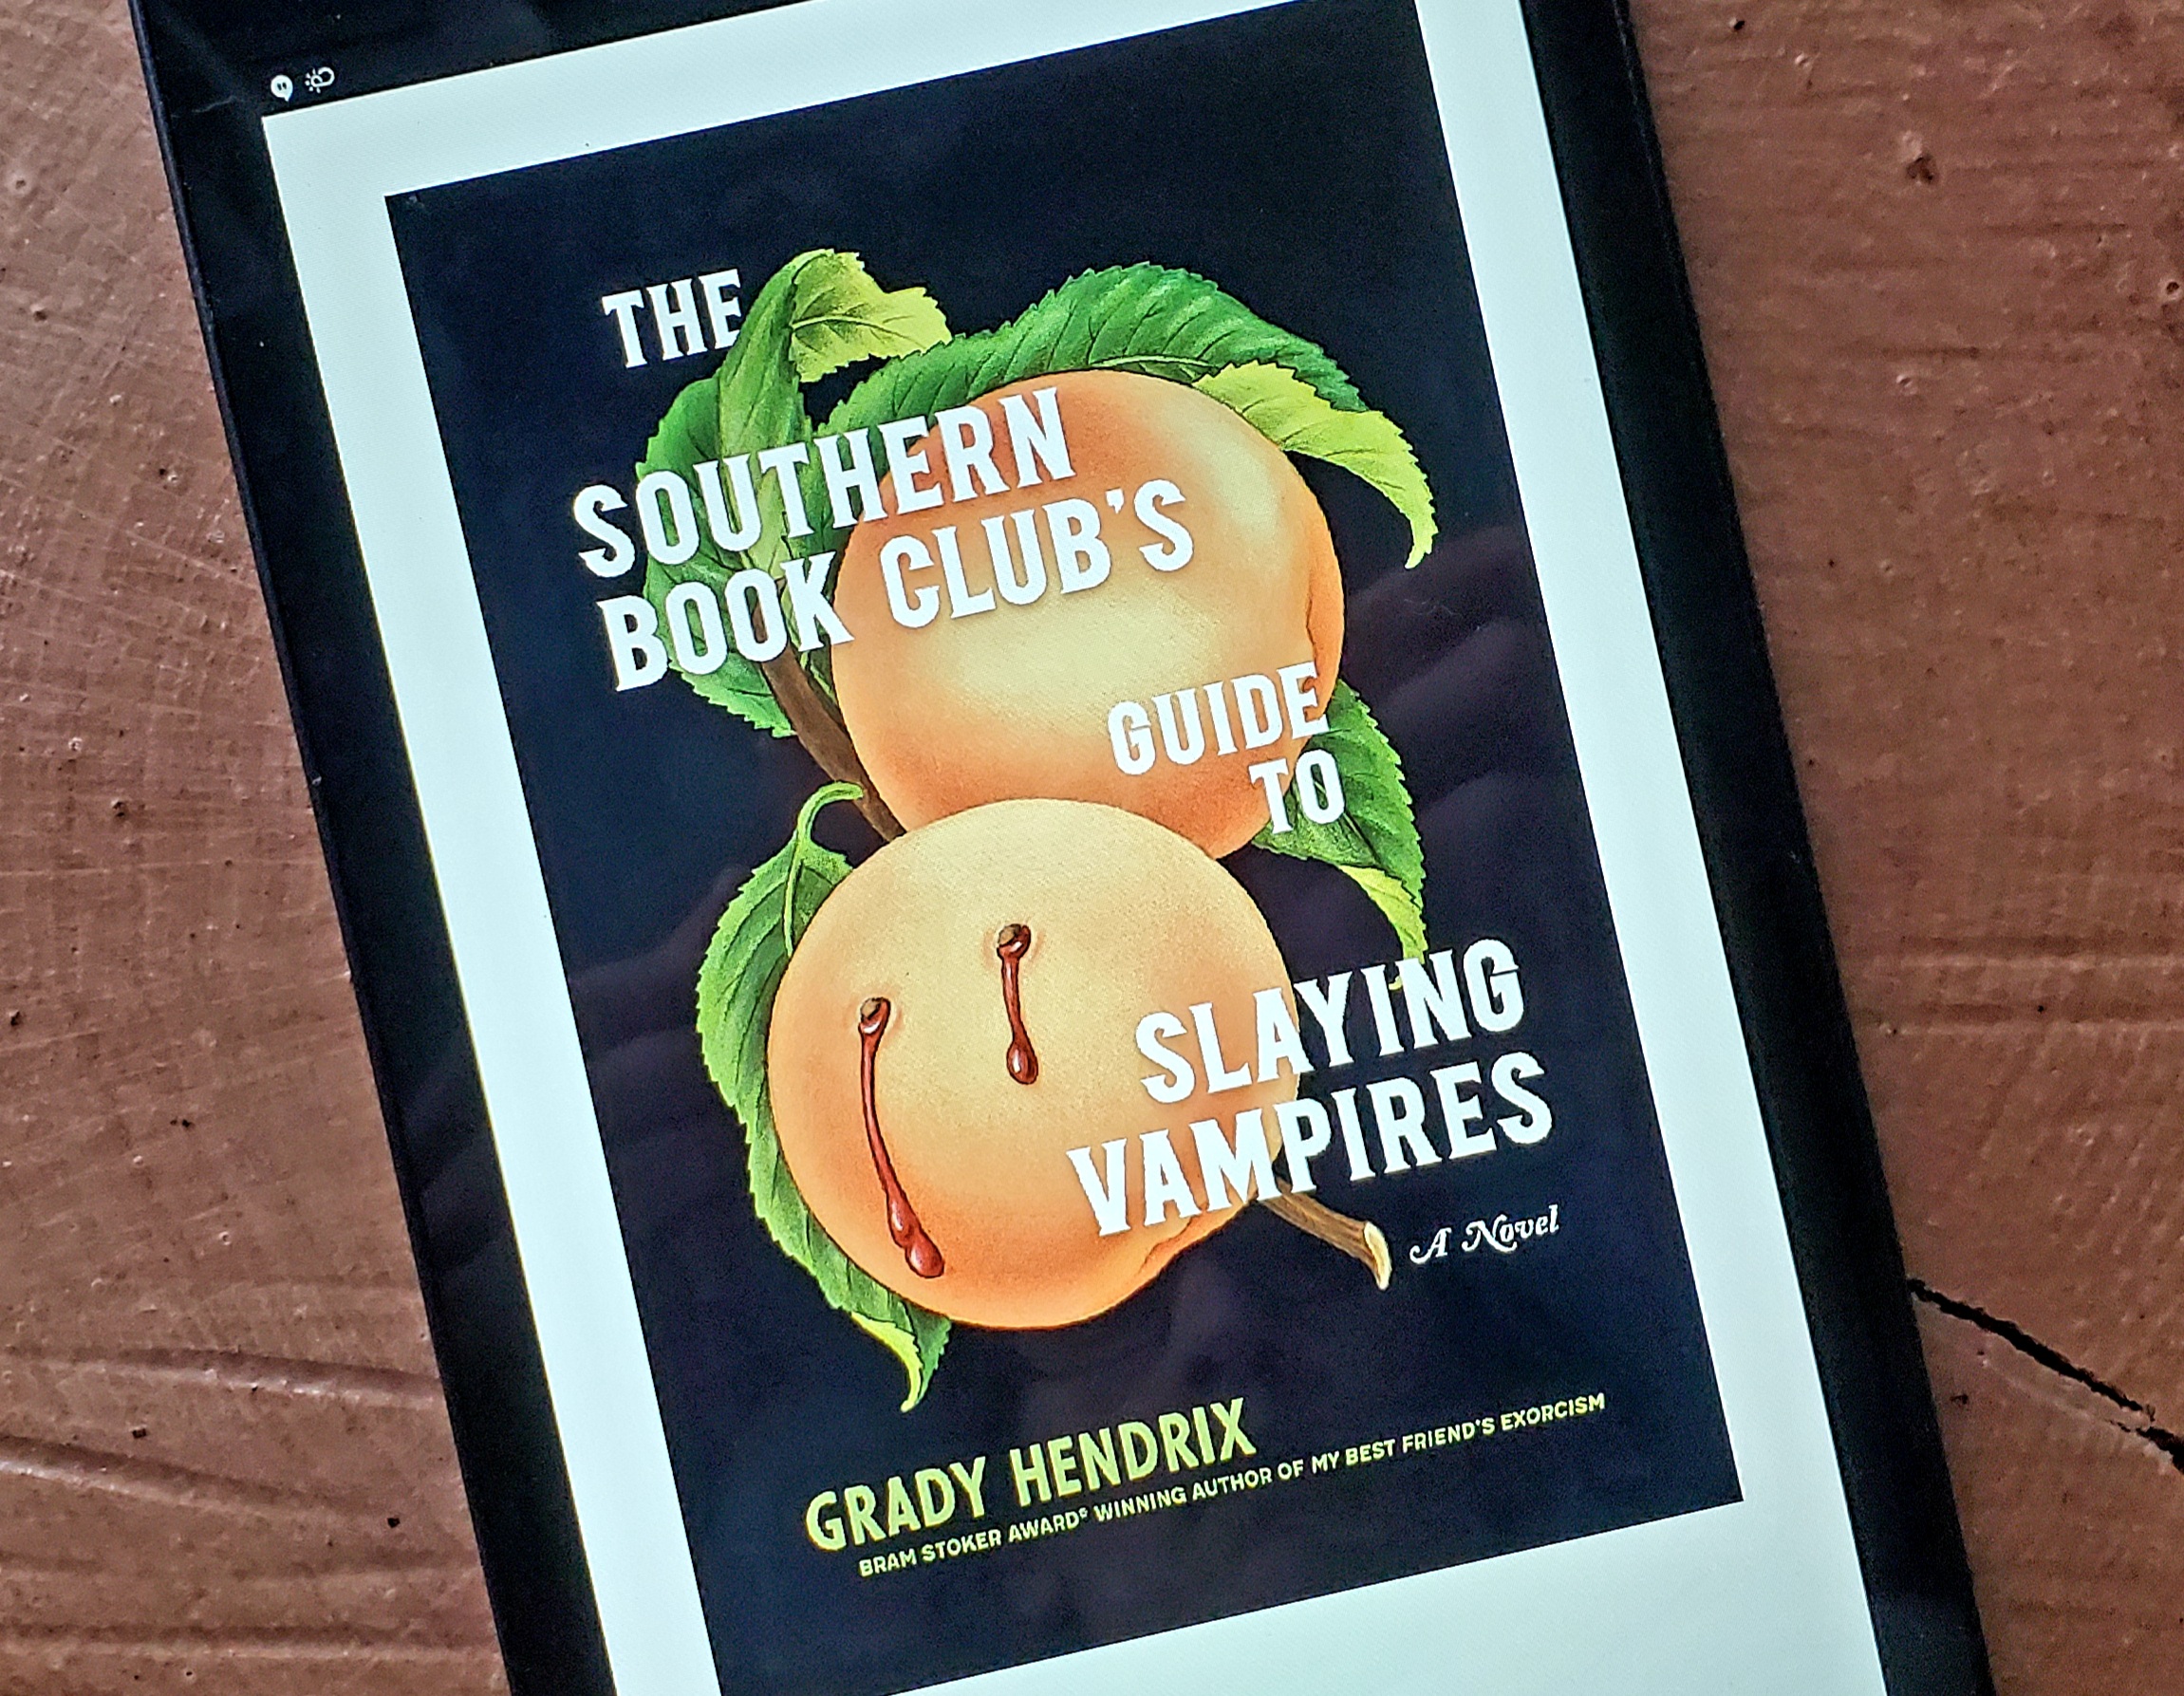 Book Review of THE SOUTHERN BOOK CLUB’S GUIDE TO SLAYING VAMPIRES